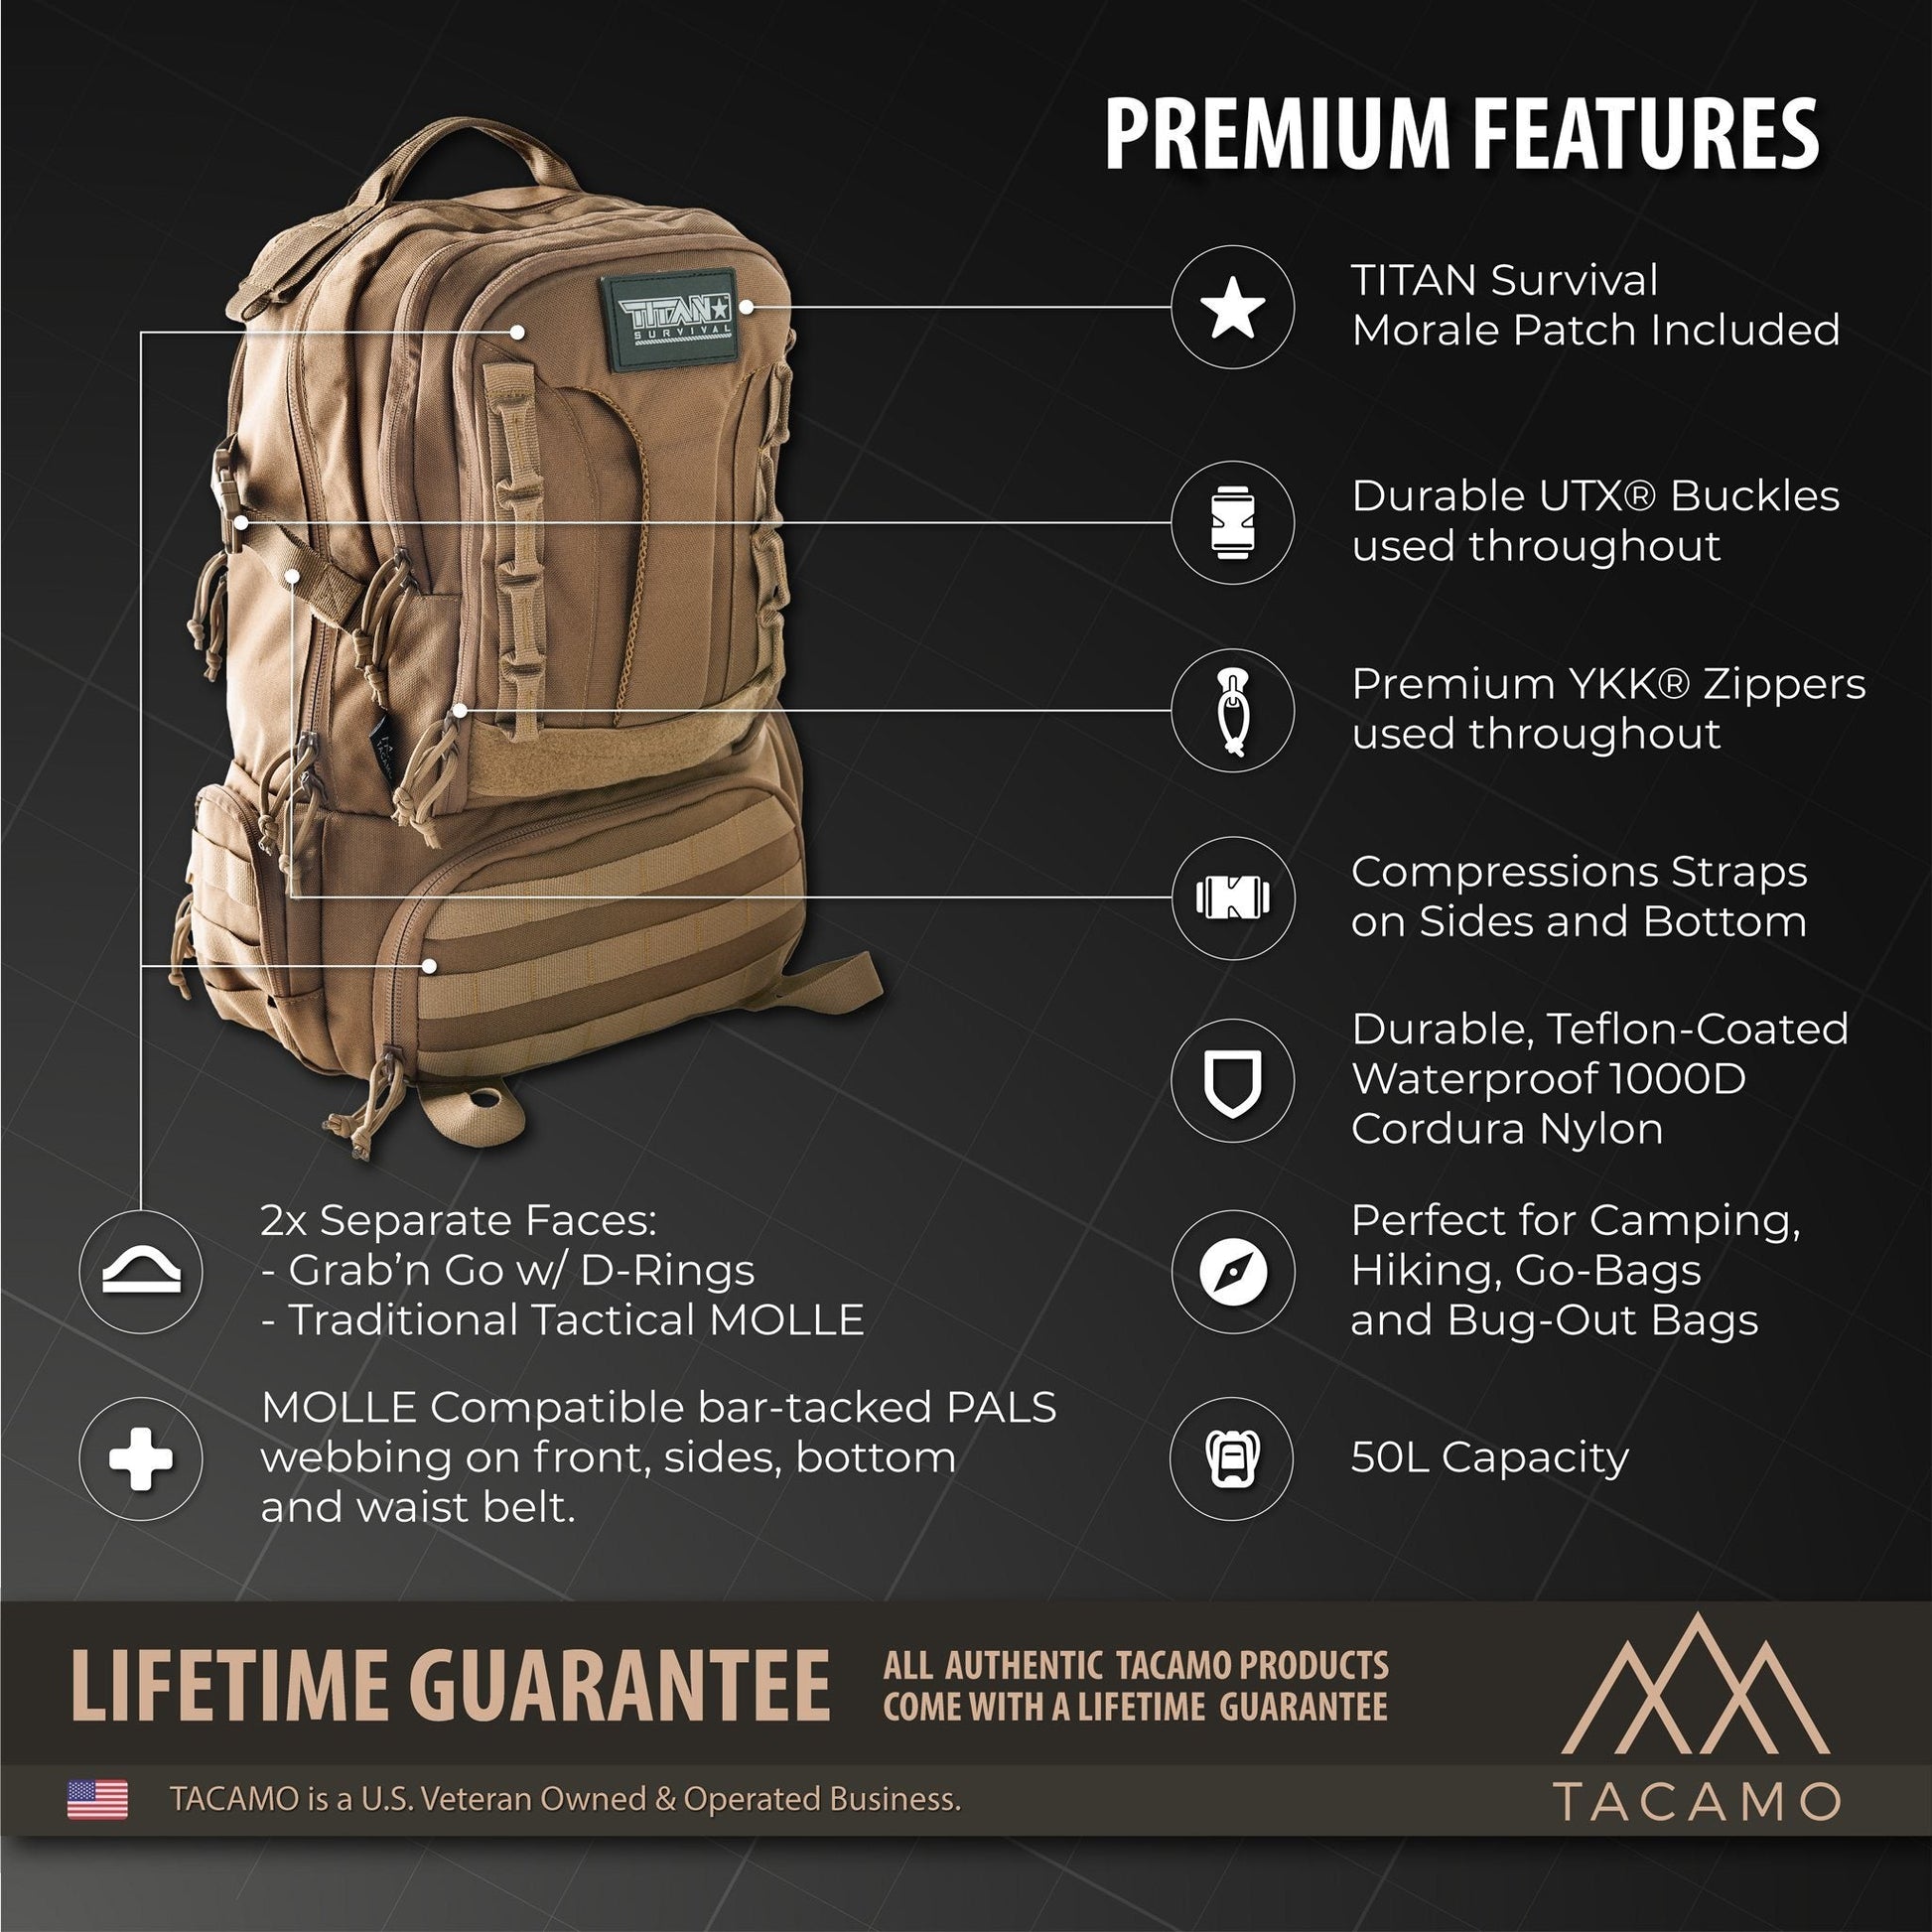 Description of the unique features and design elements on the BC50 50L Tactical Backpack